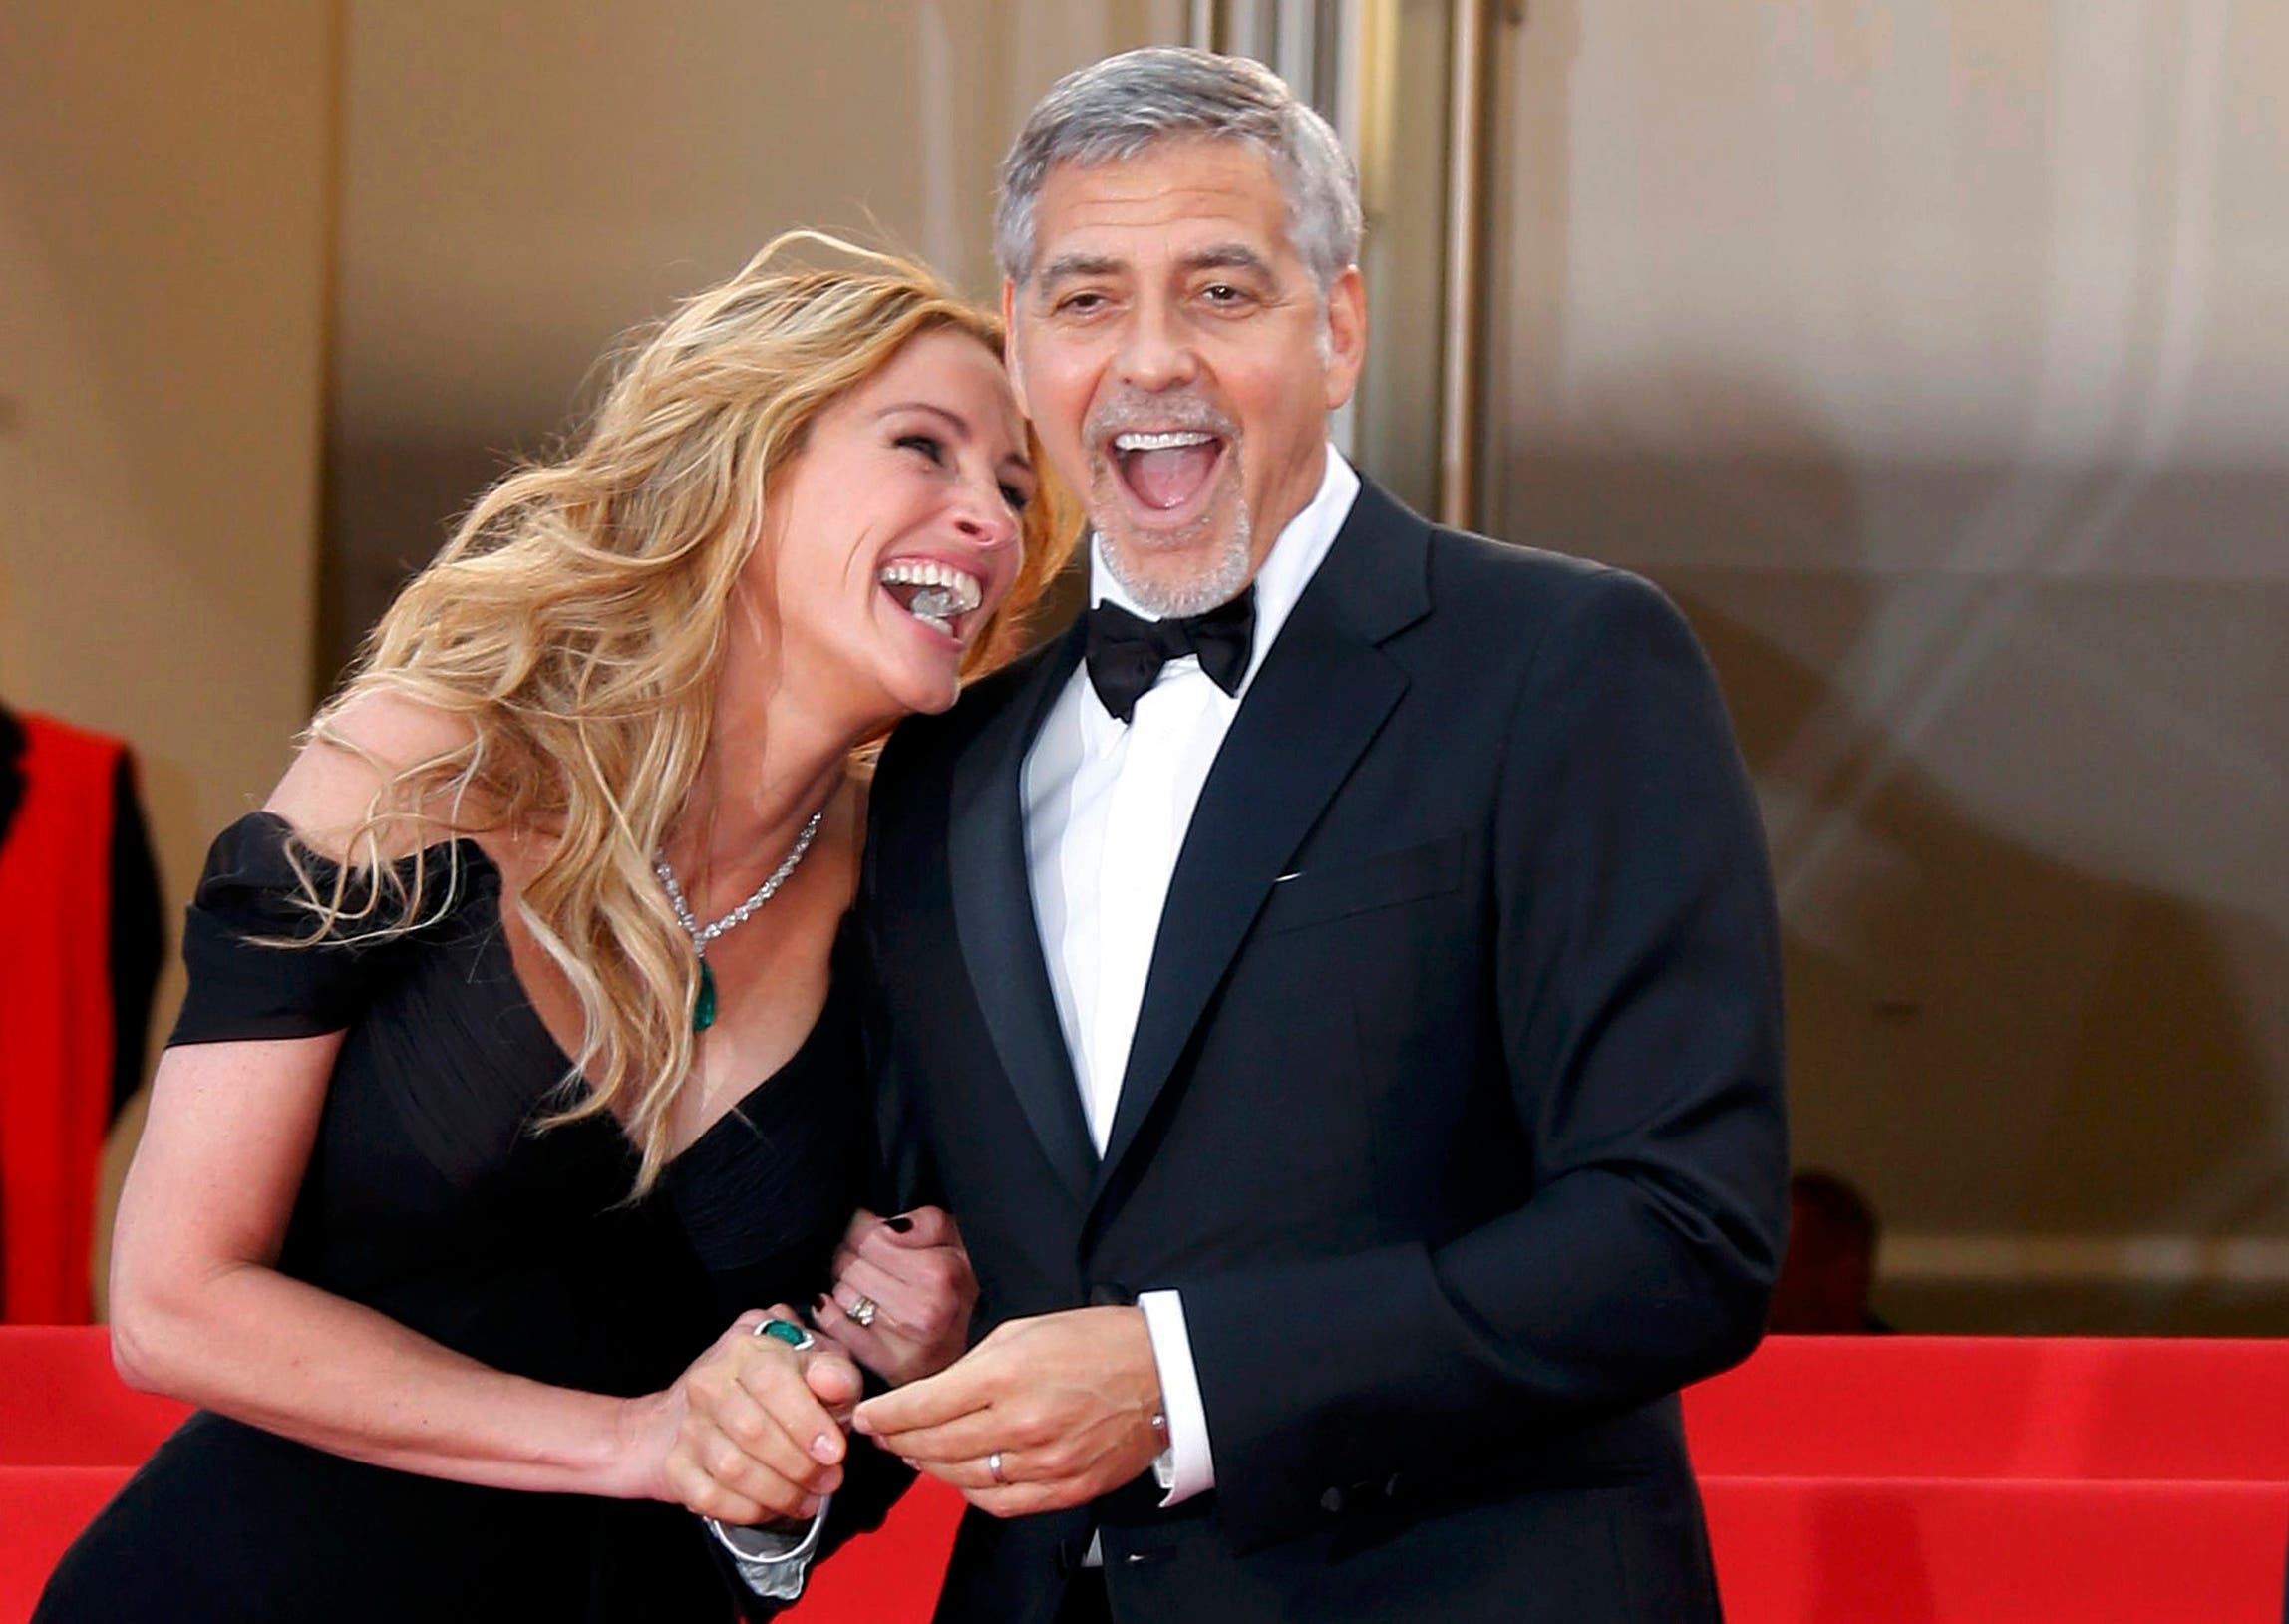 Julia Roberts, George Clooney and wife Amal hit red carpet at Cannes 